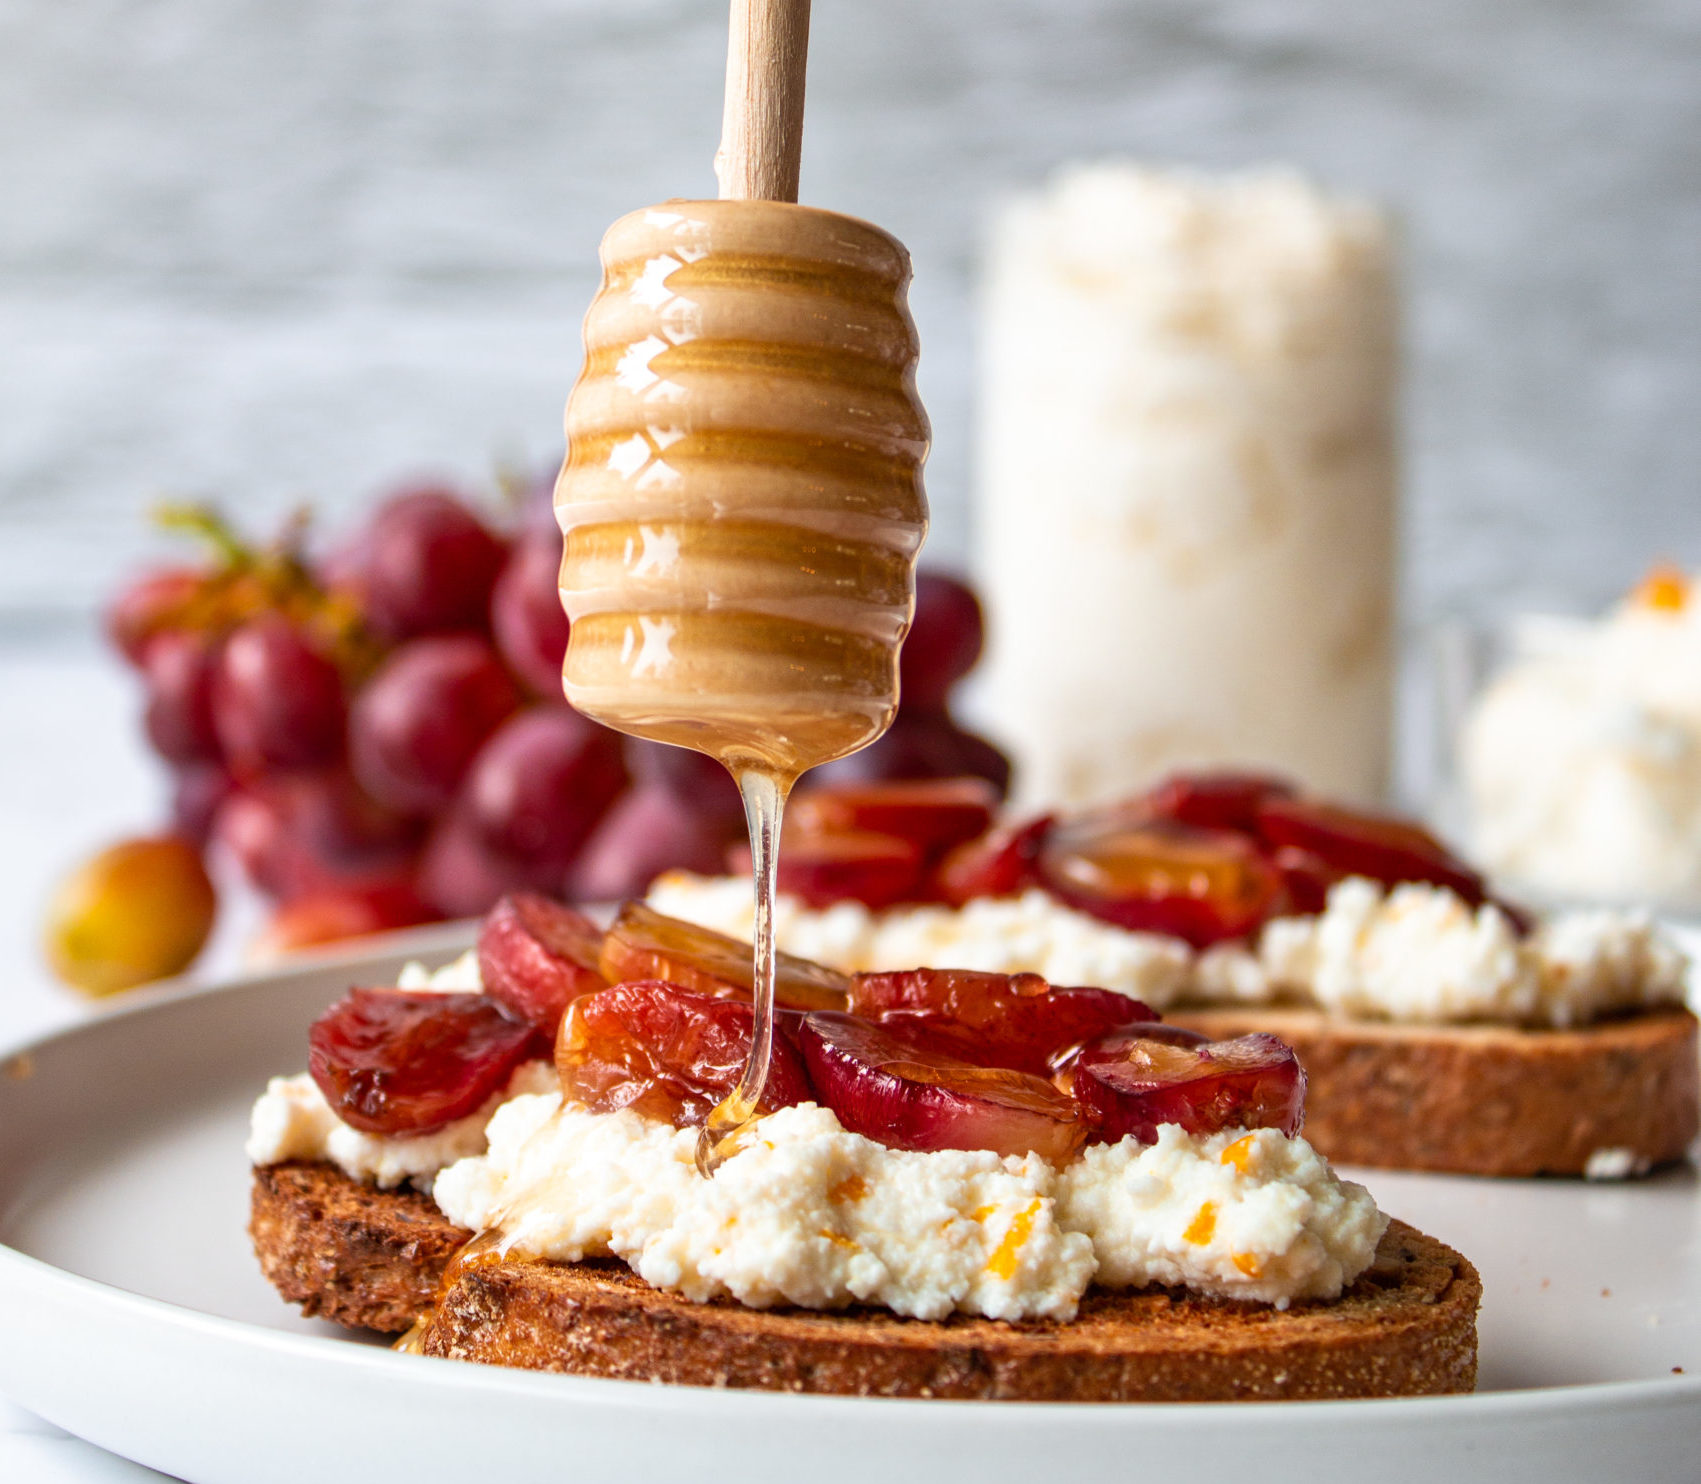 honey drizzled on ricotta toast with grapes